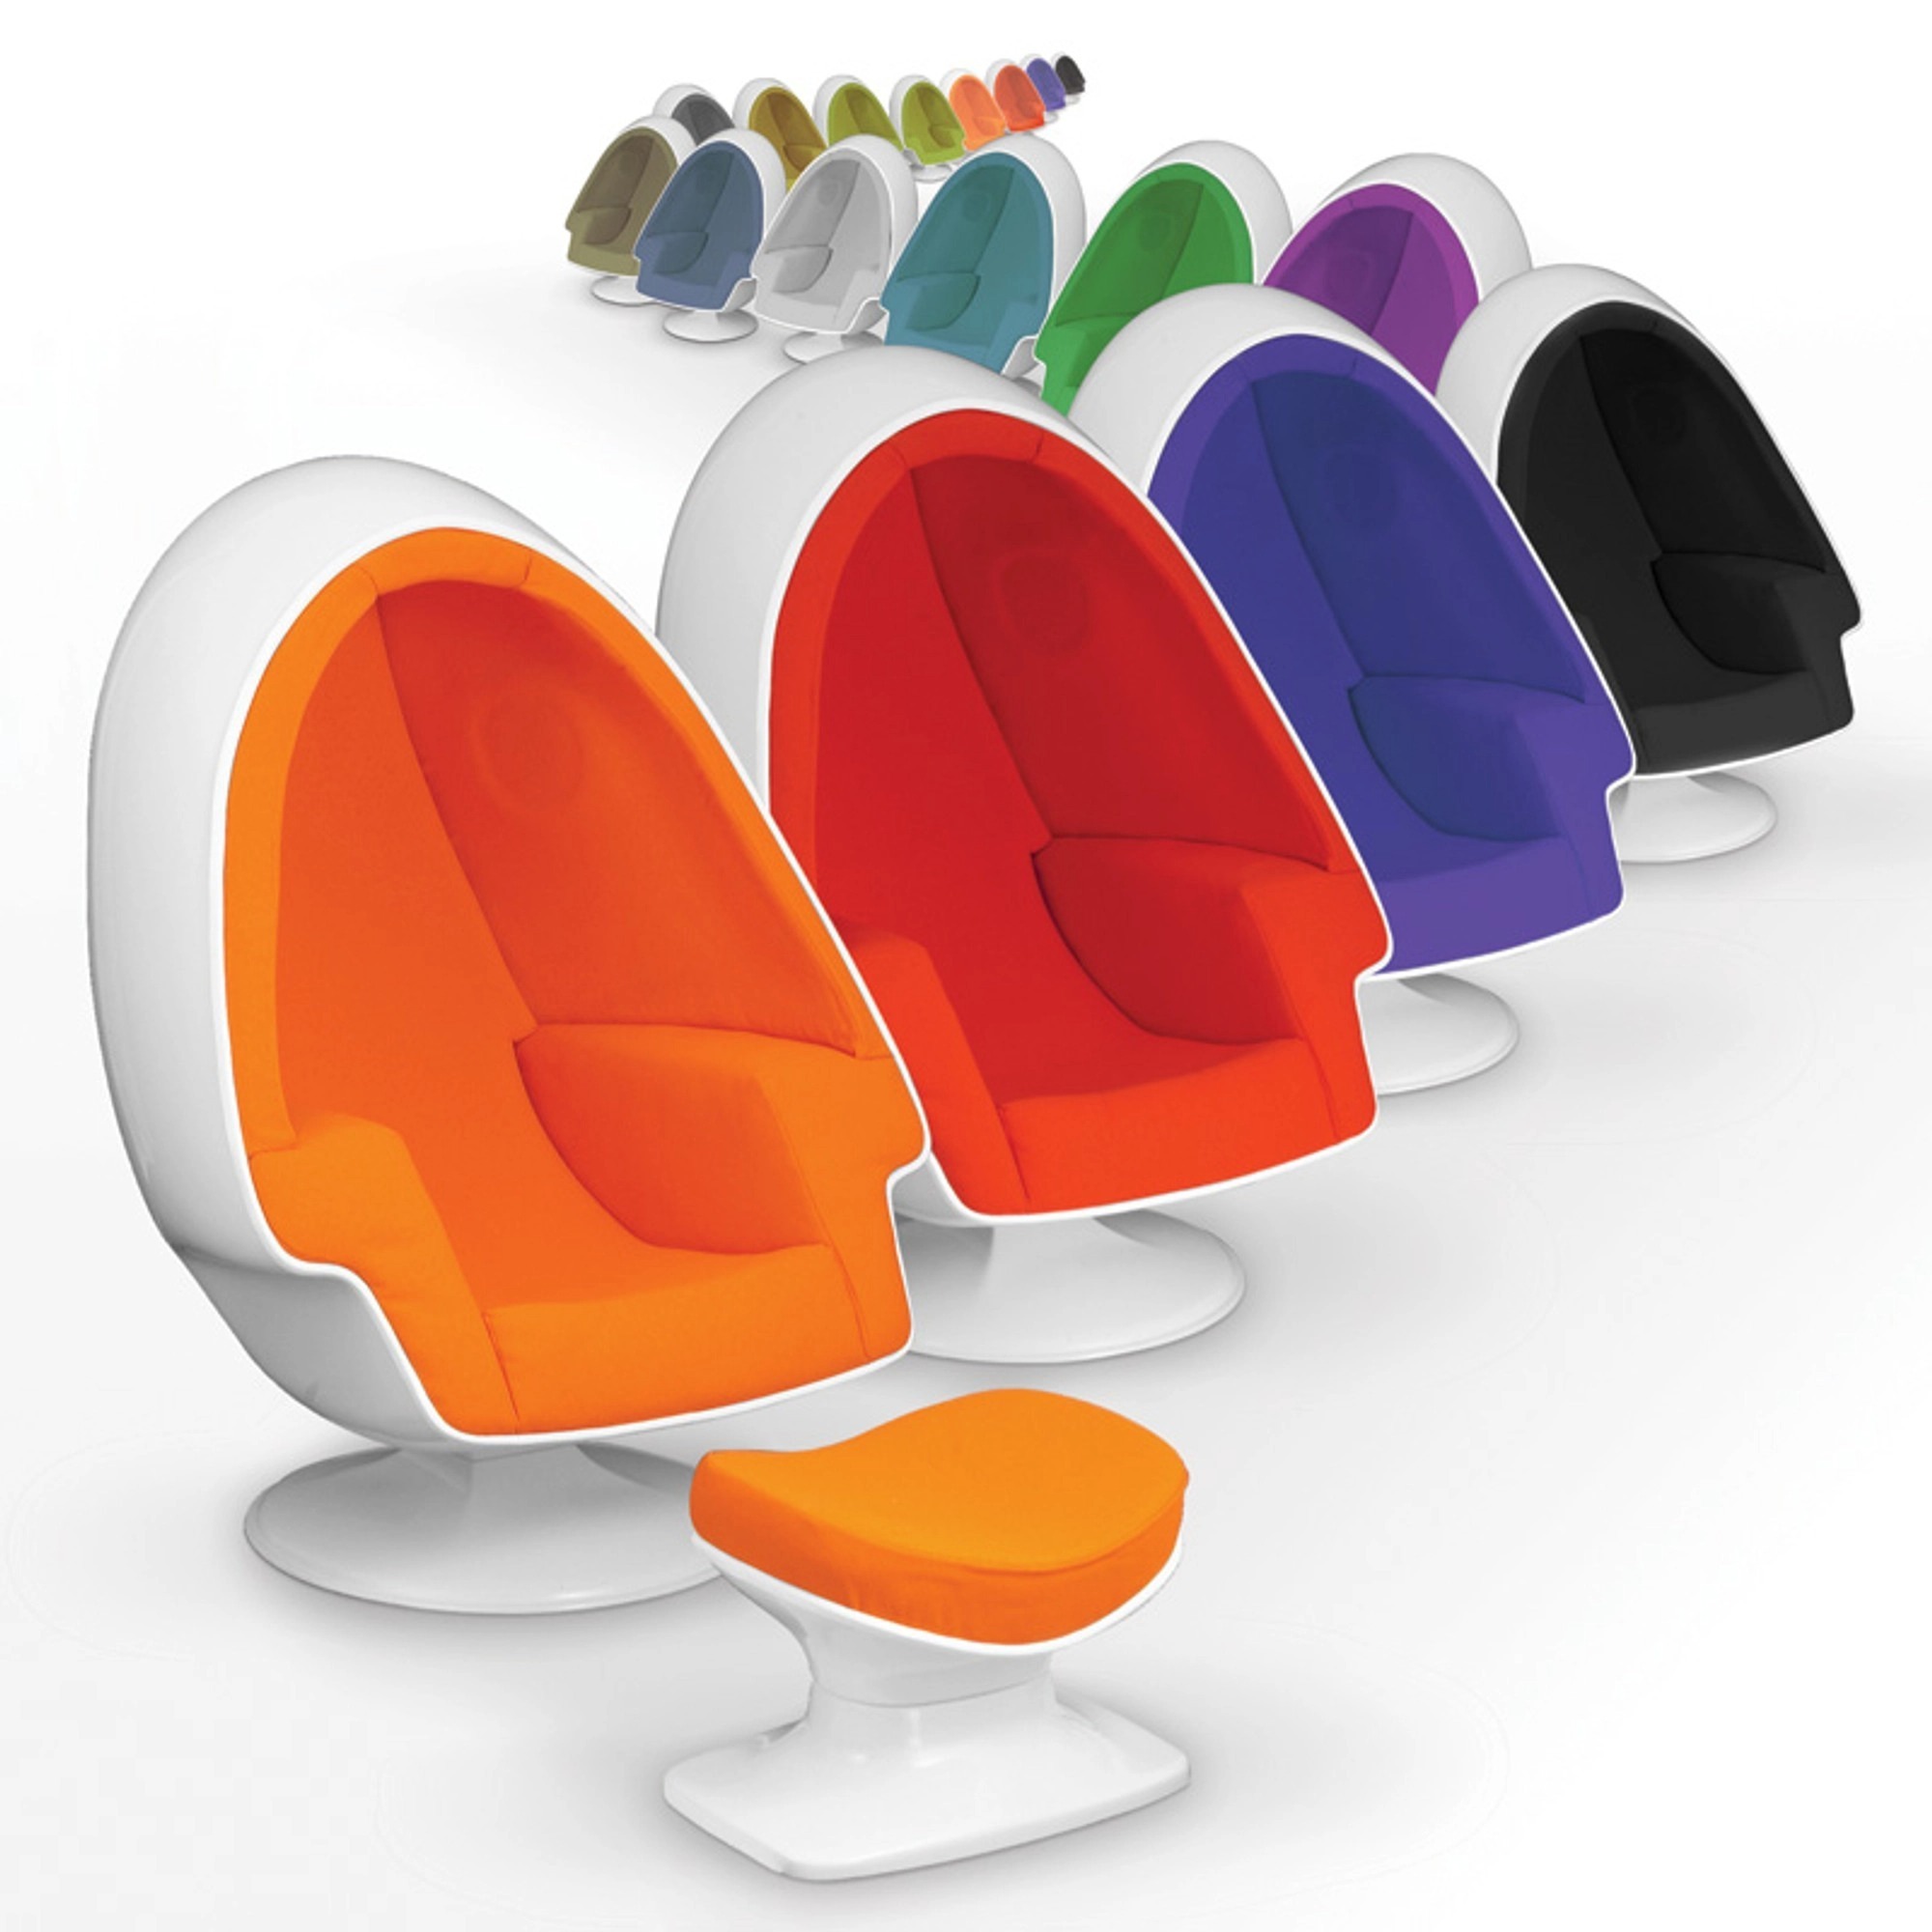 Egg Chair With Speakers